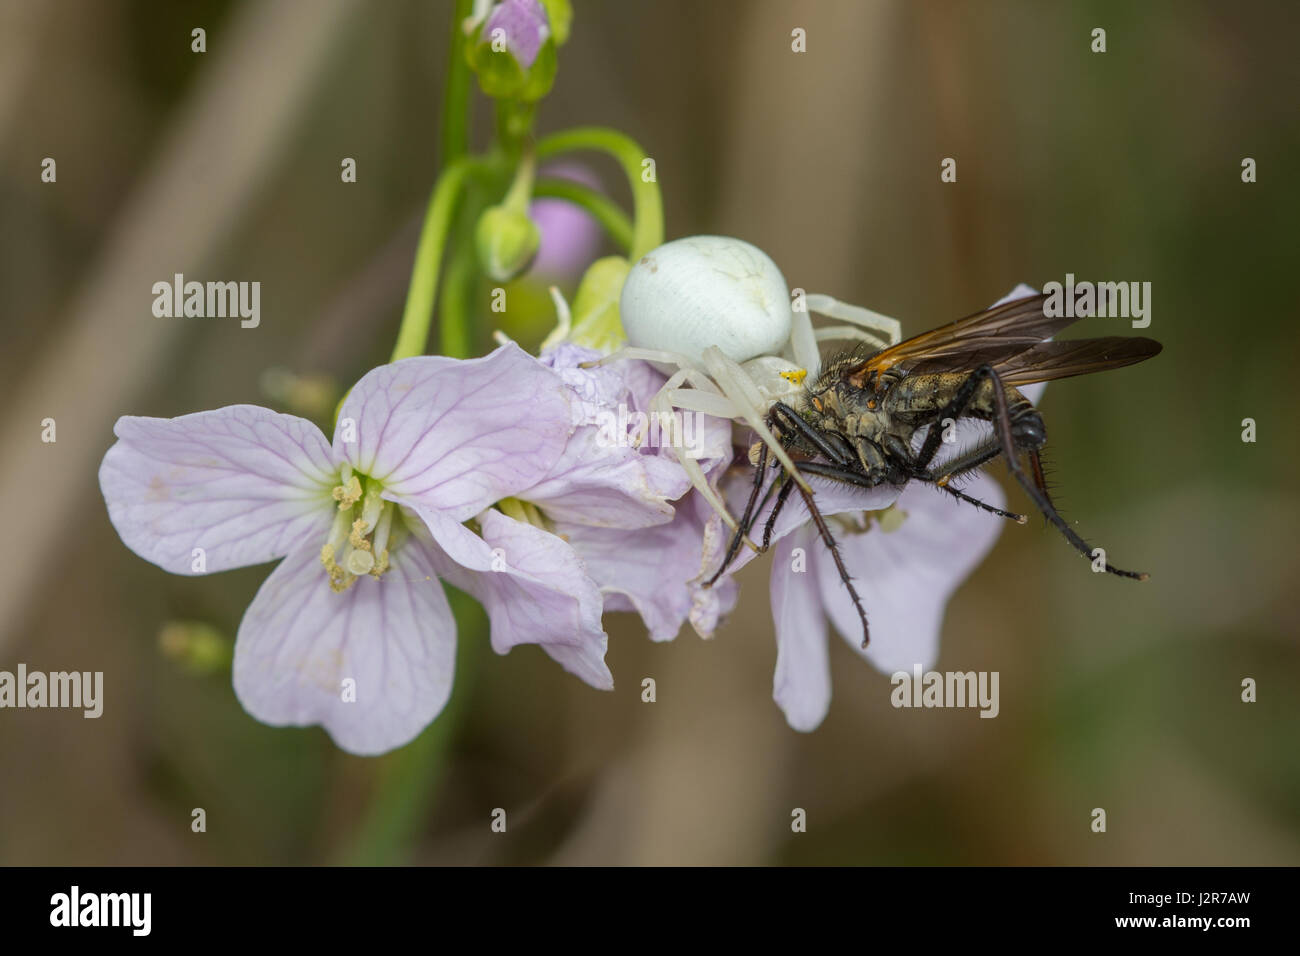 Close-up of a white crab spider (Thomisidae) predating a robberfly on a cuckooflower (also known as lady's smock or Cardamine pratensis) Stock Photo